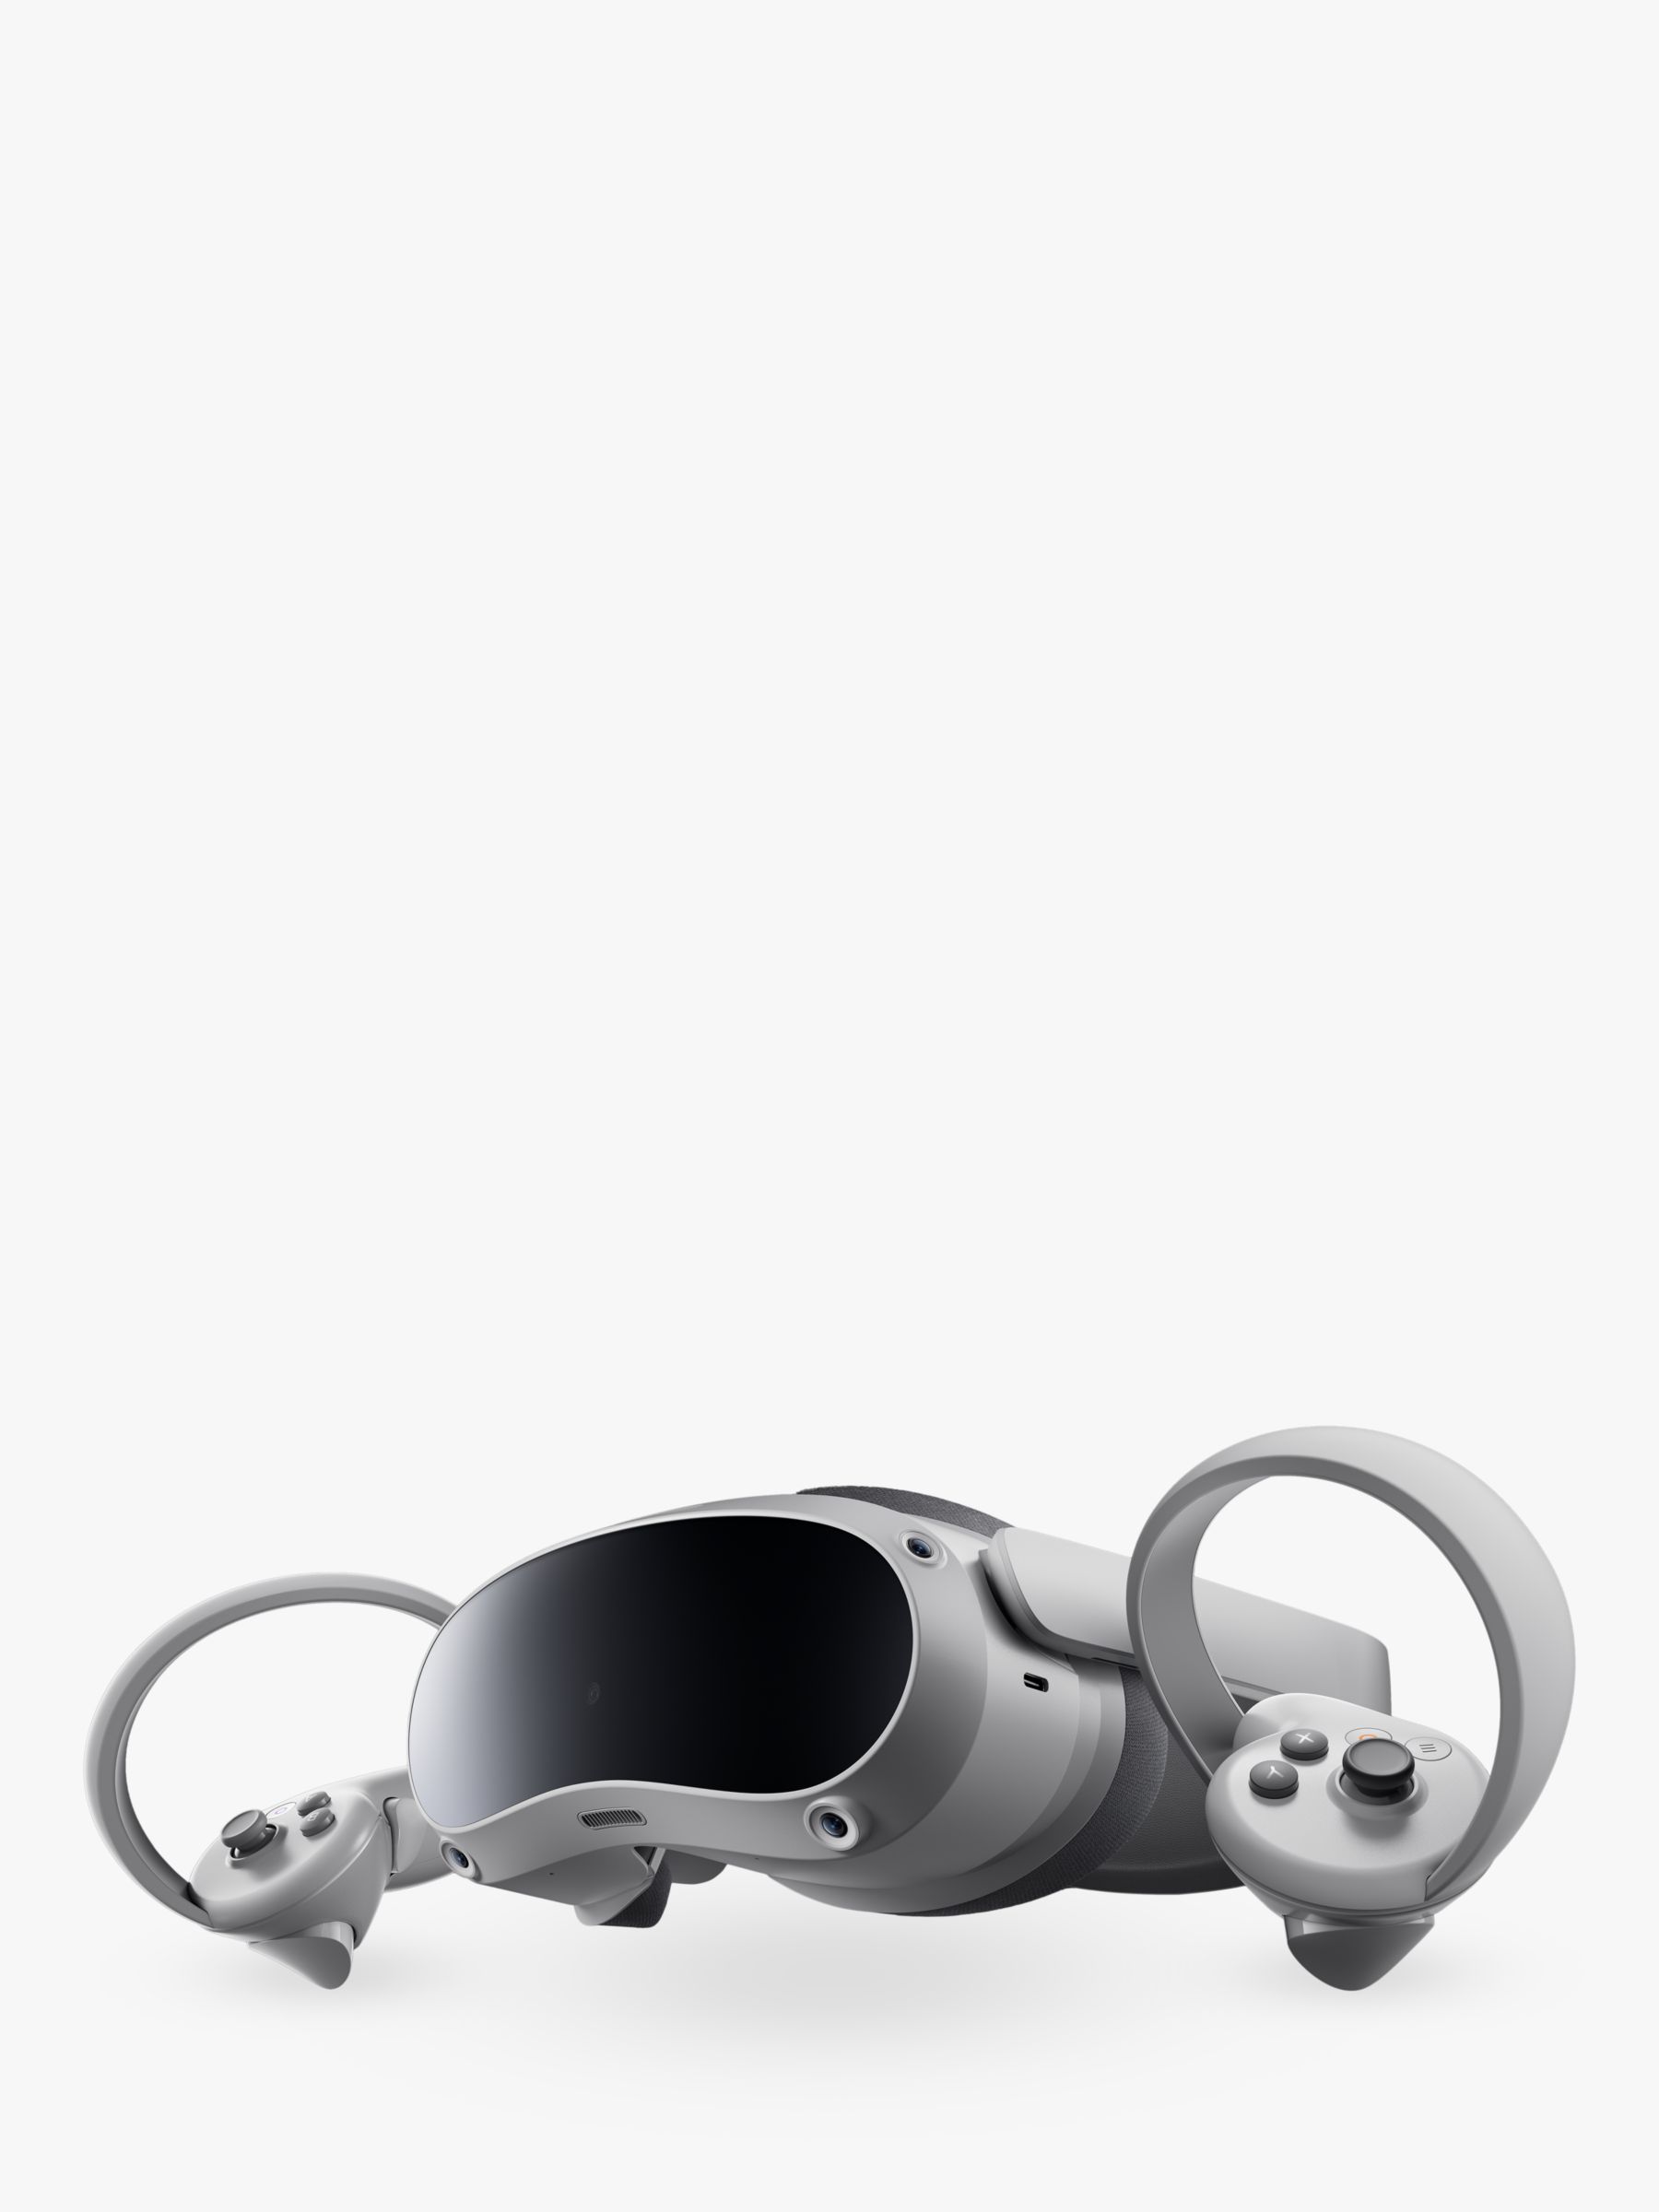 Pico 4 All-In-One Virtual Reality Headset and Controllers, 128GB